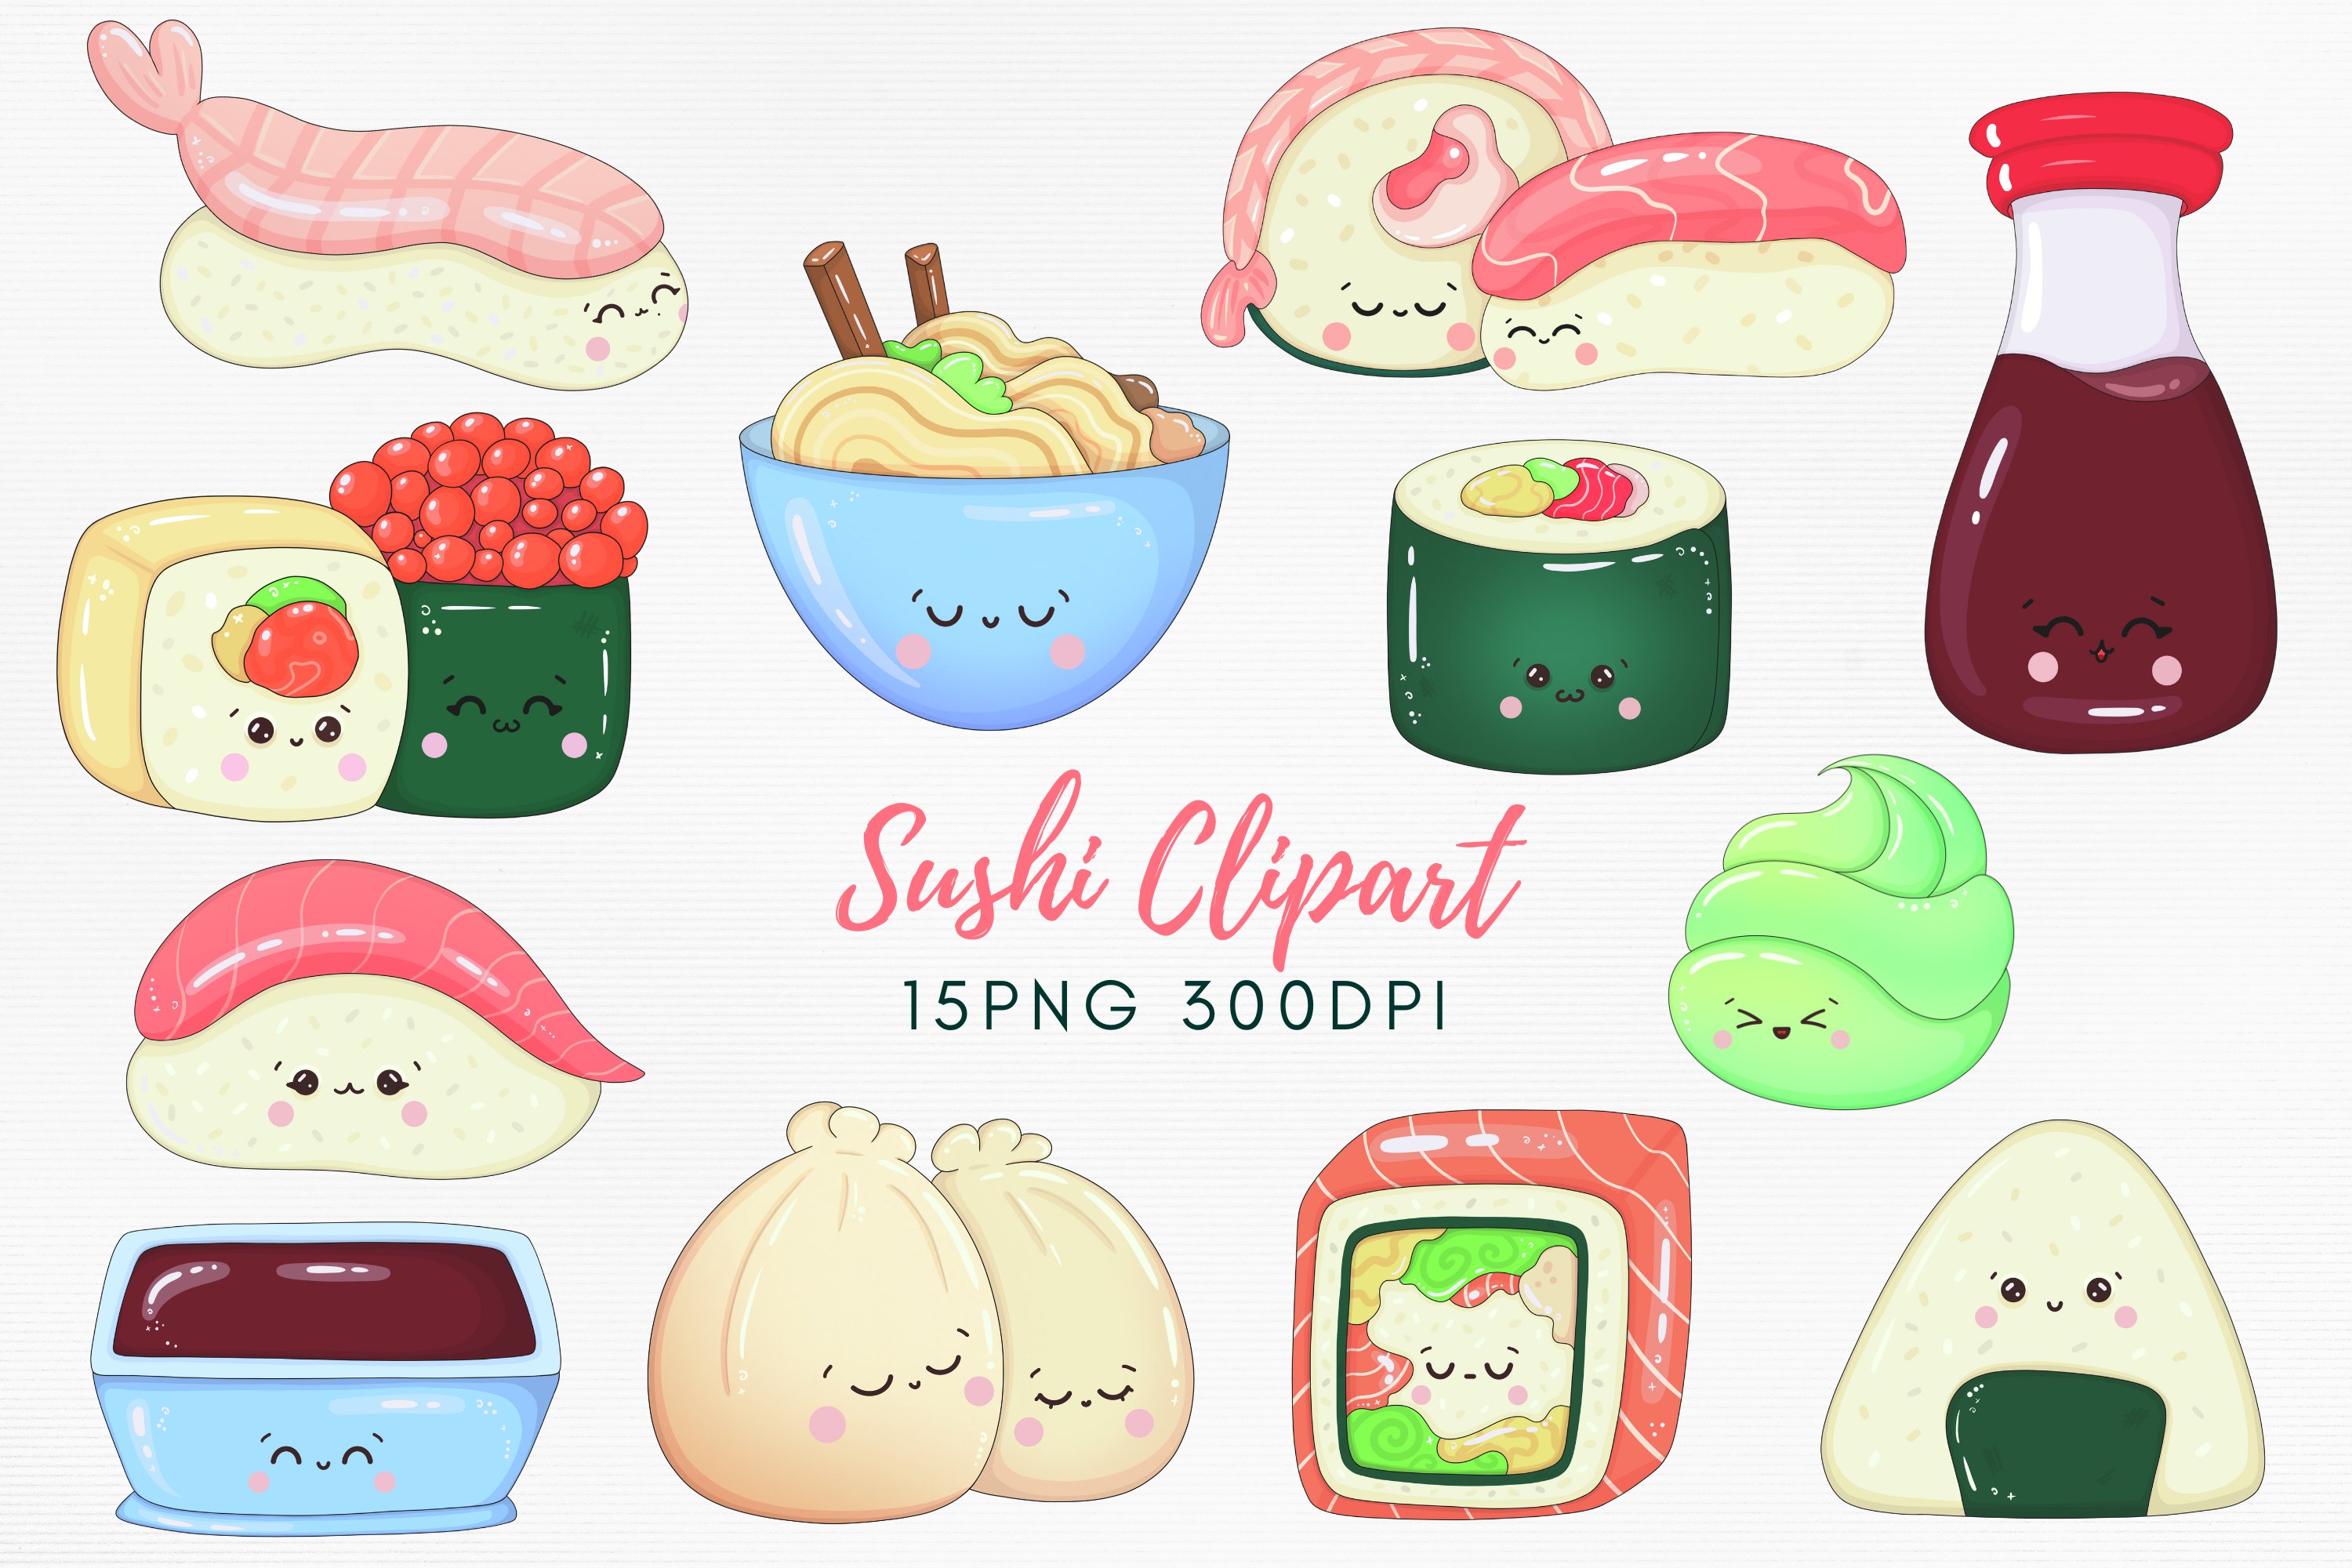 Pink lettering "Sushi Clipart" and different colorful illustrations on a gray background.